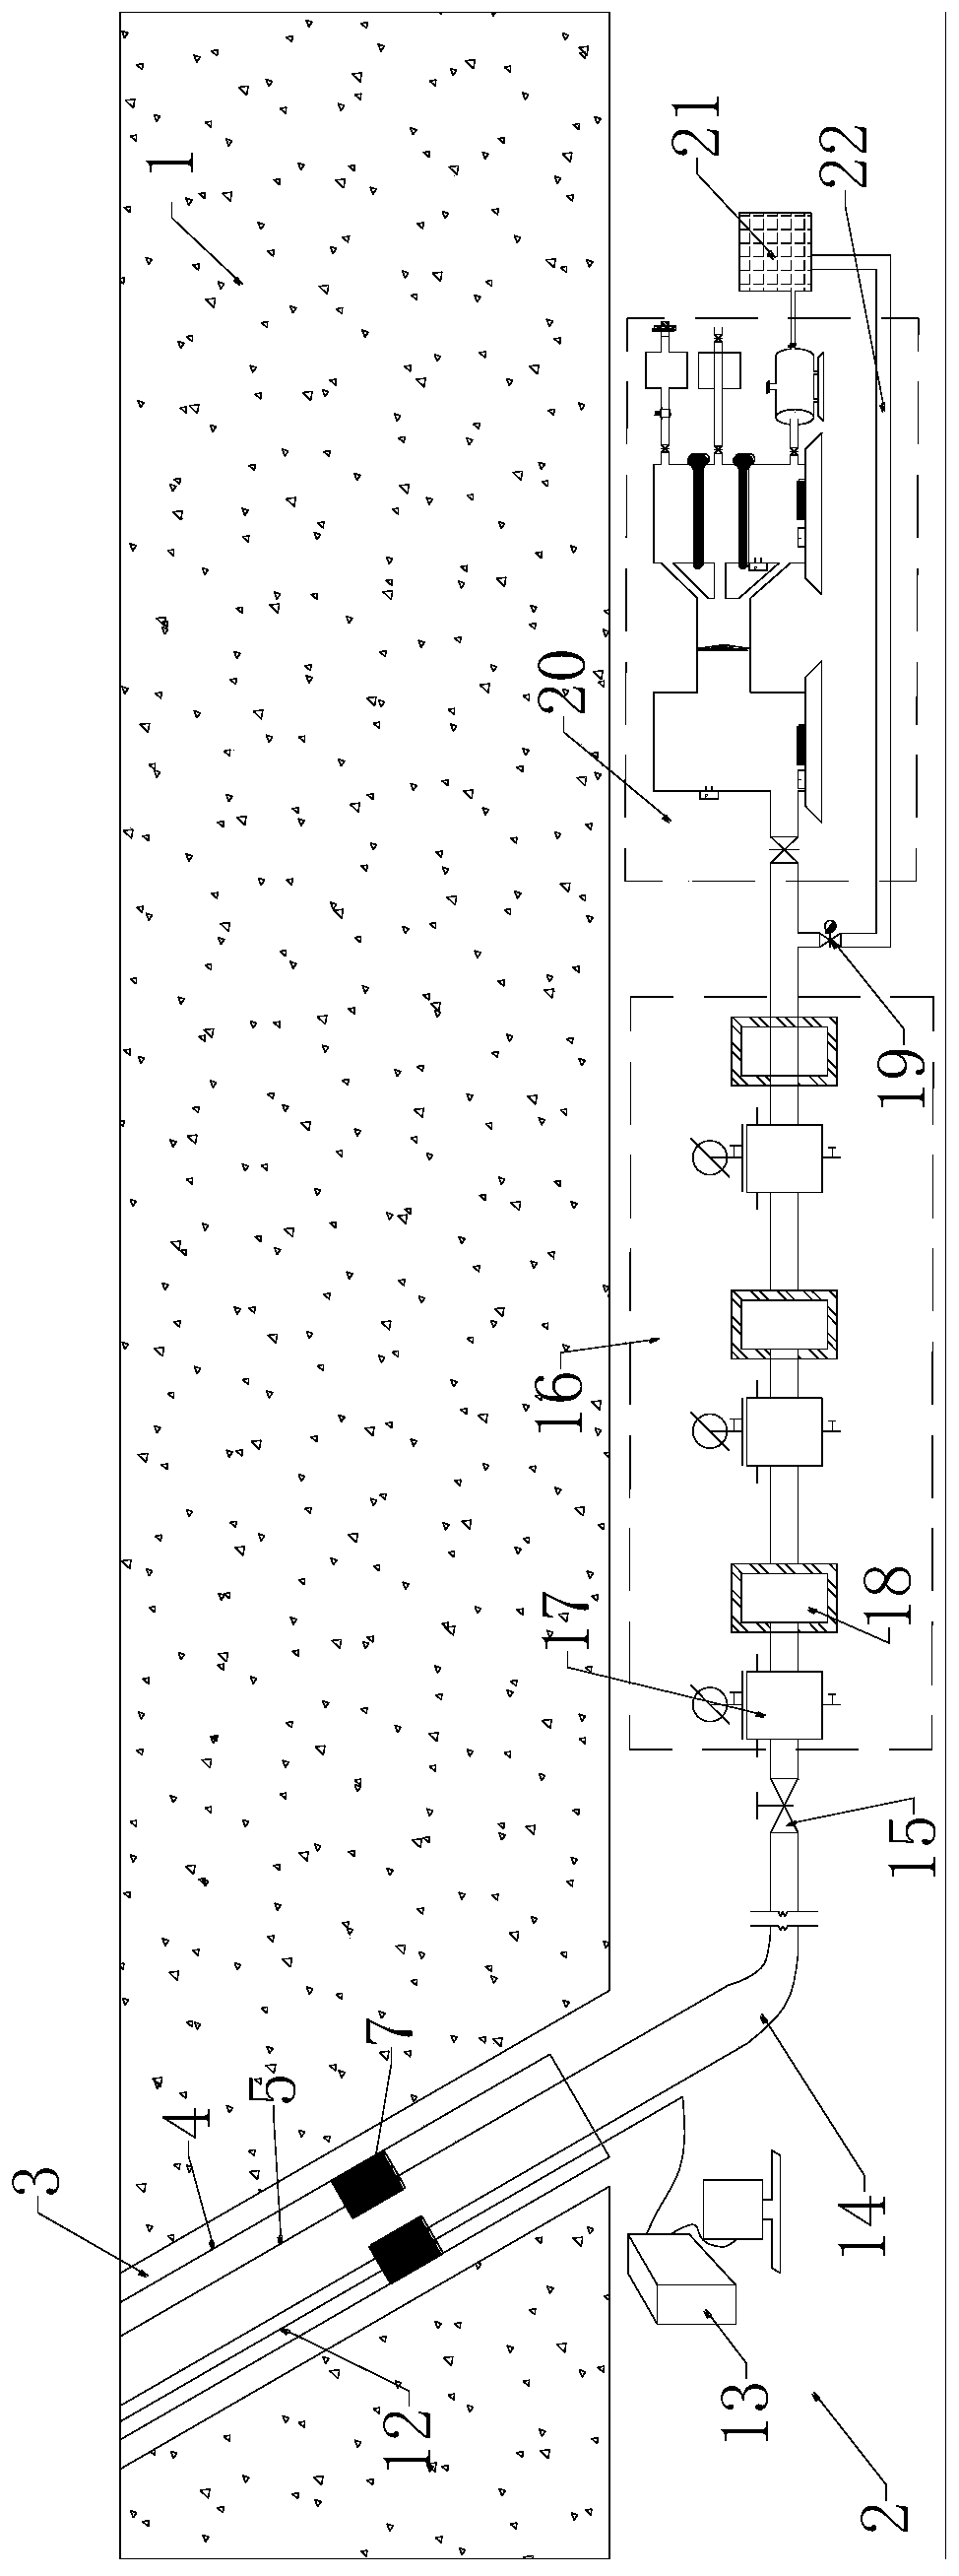 A high-temperature and high-pressure steam secondary fracturing device and method for coal seam drilling